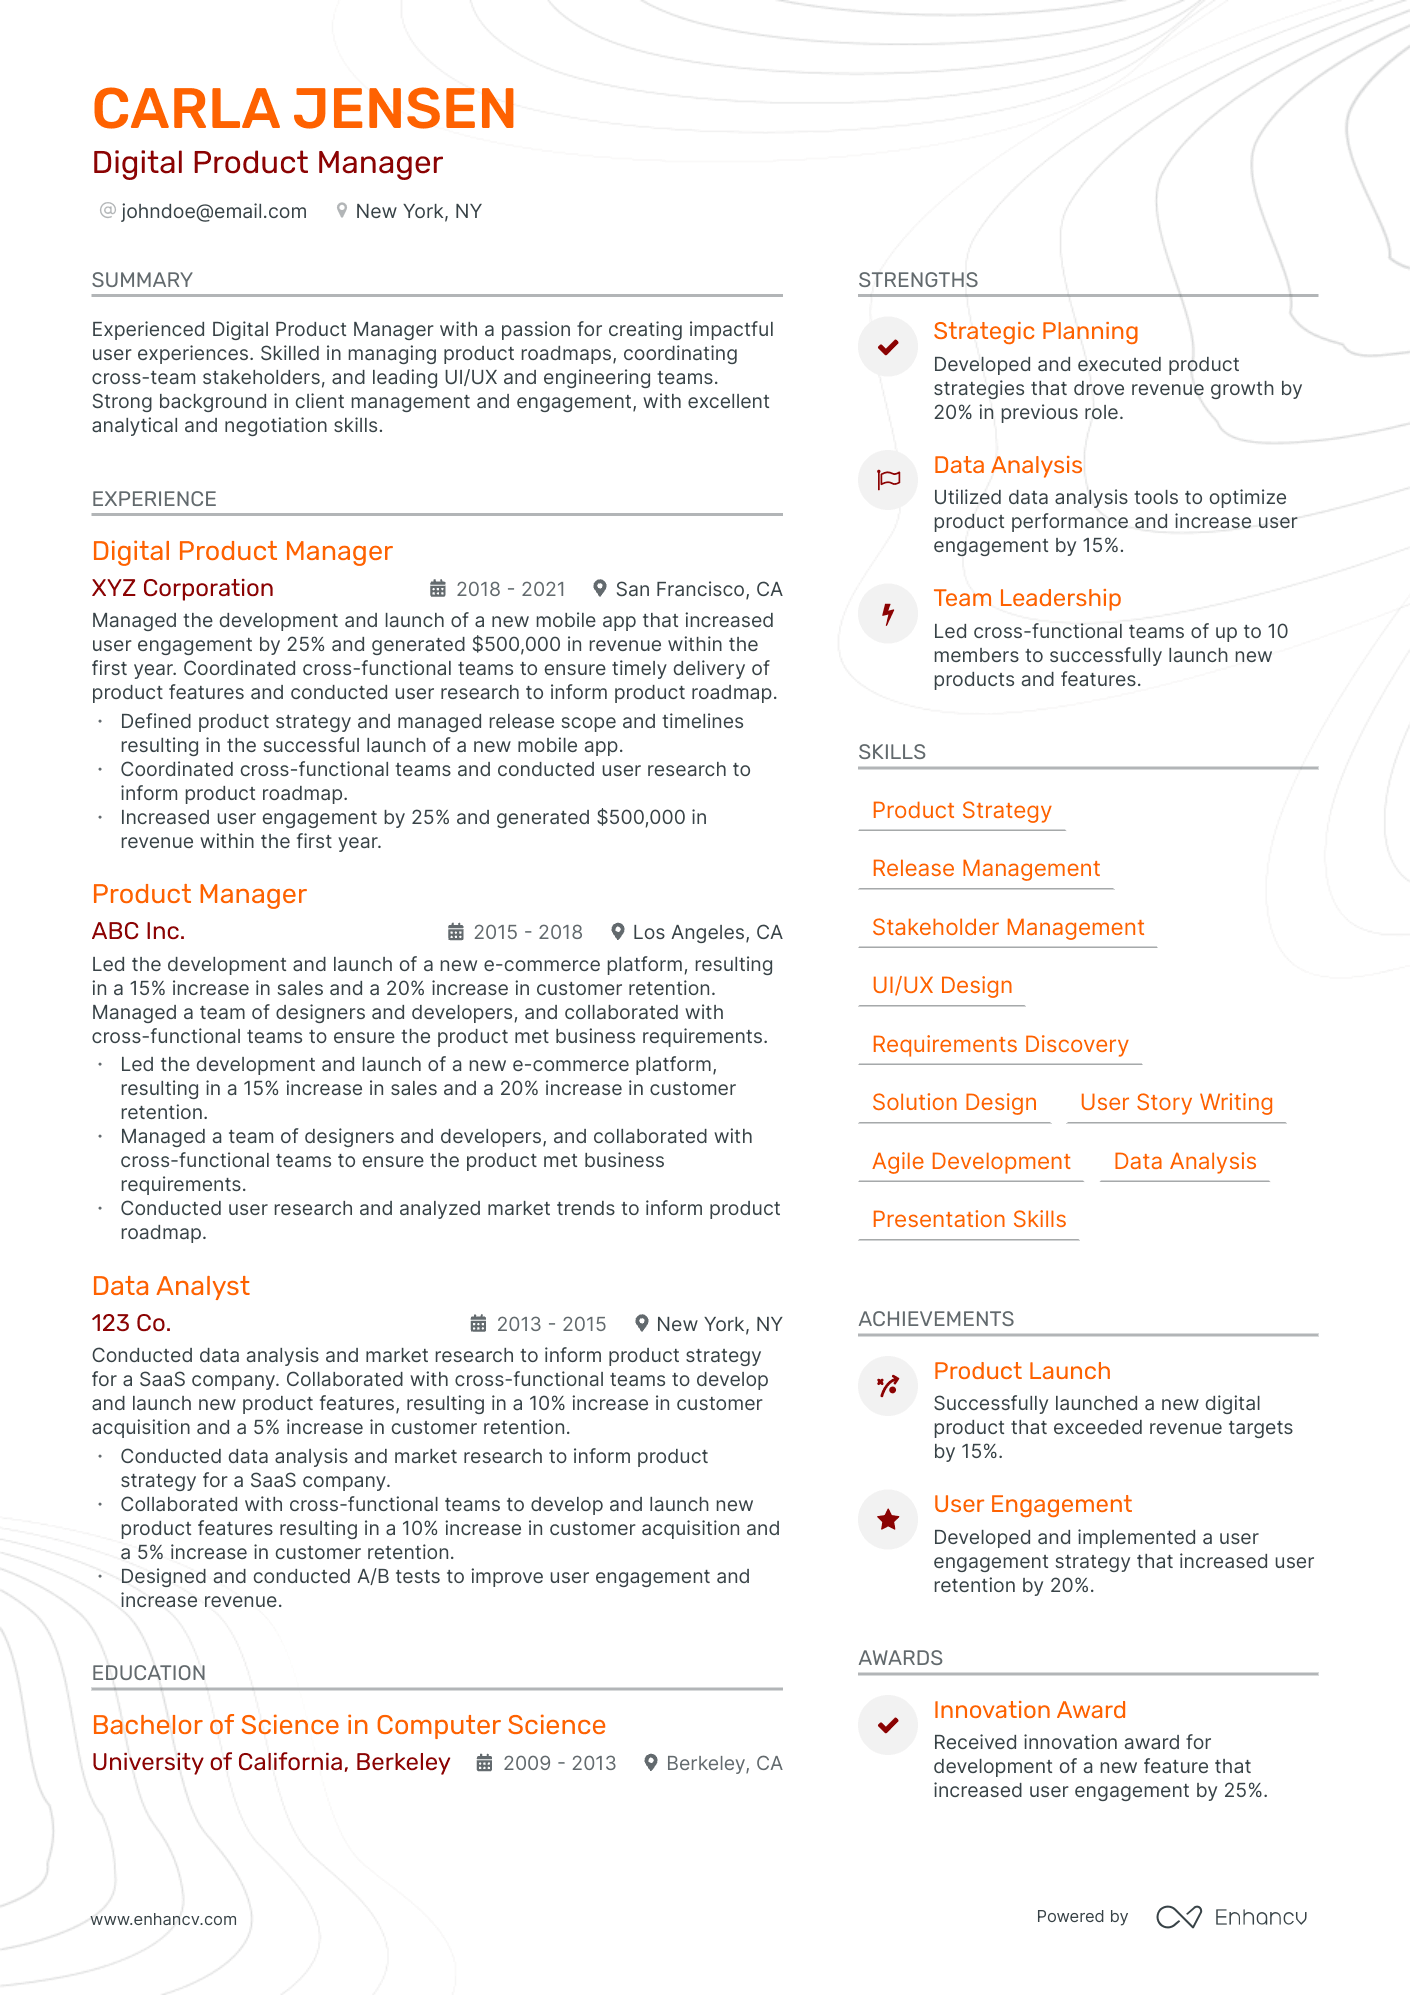 Digital Product Manager resume example